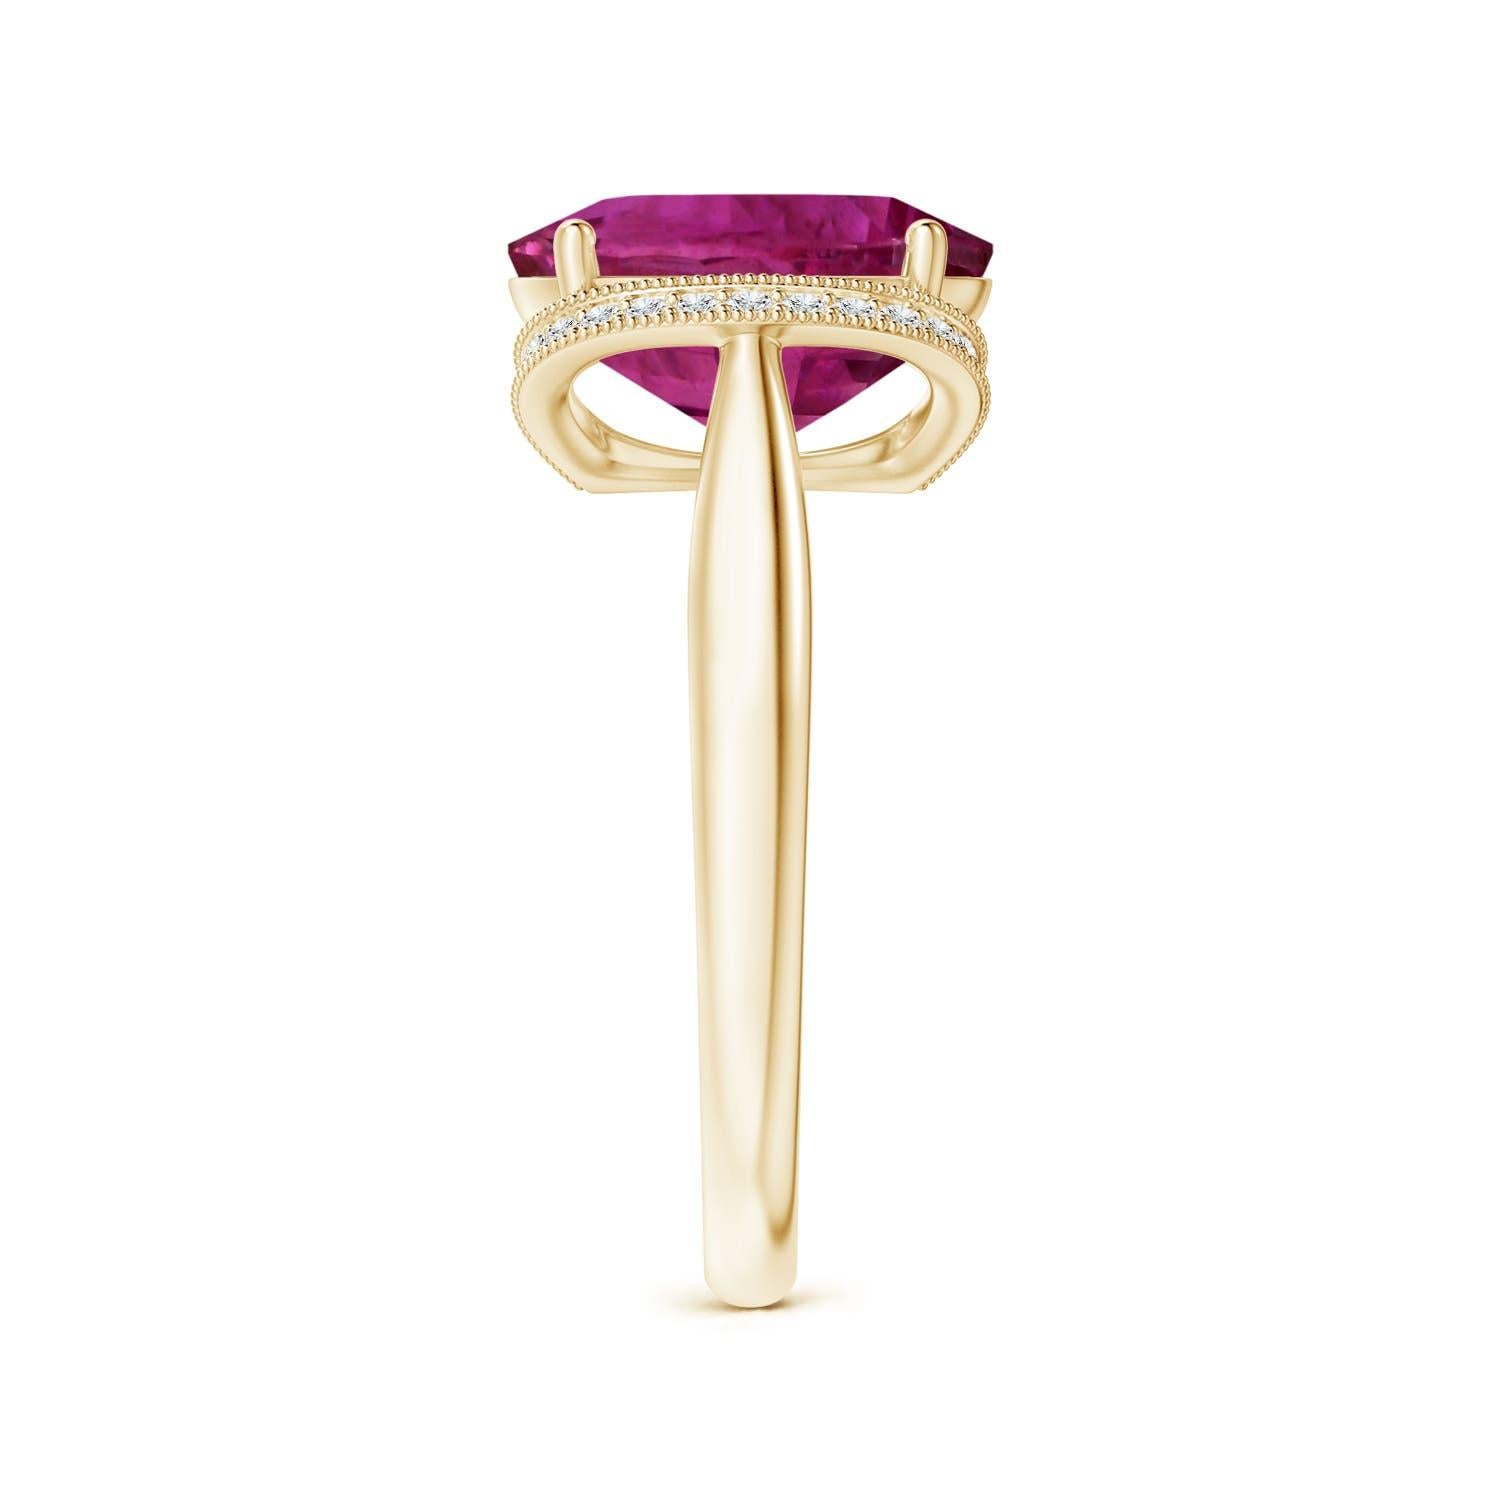 For Sale:  Angara Gia Certified Pink Sapphire Ring in Yellow Gold with Diamond Half Halo 3